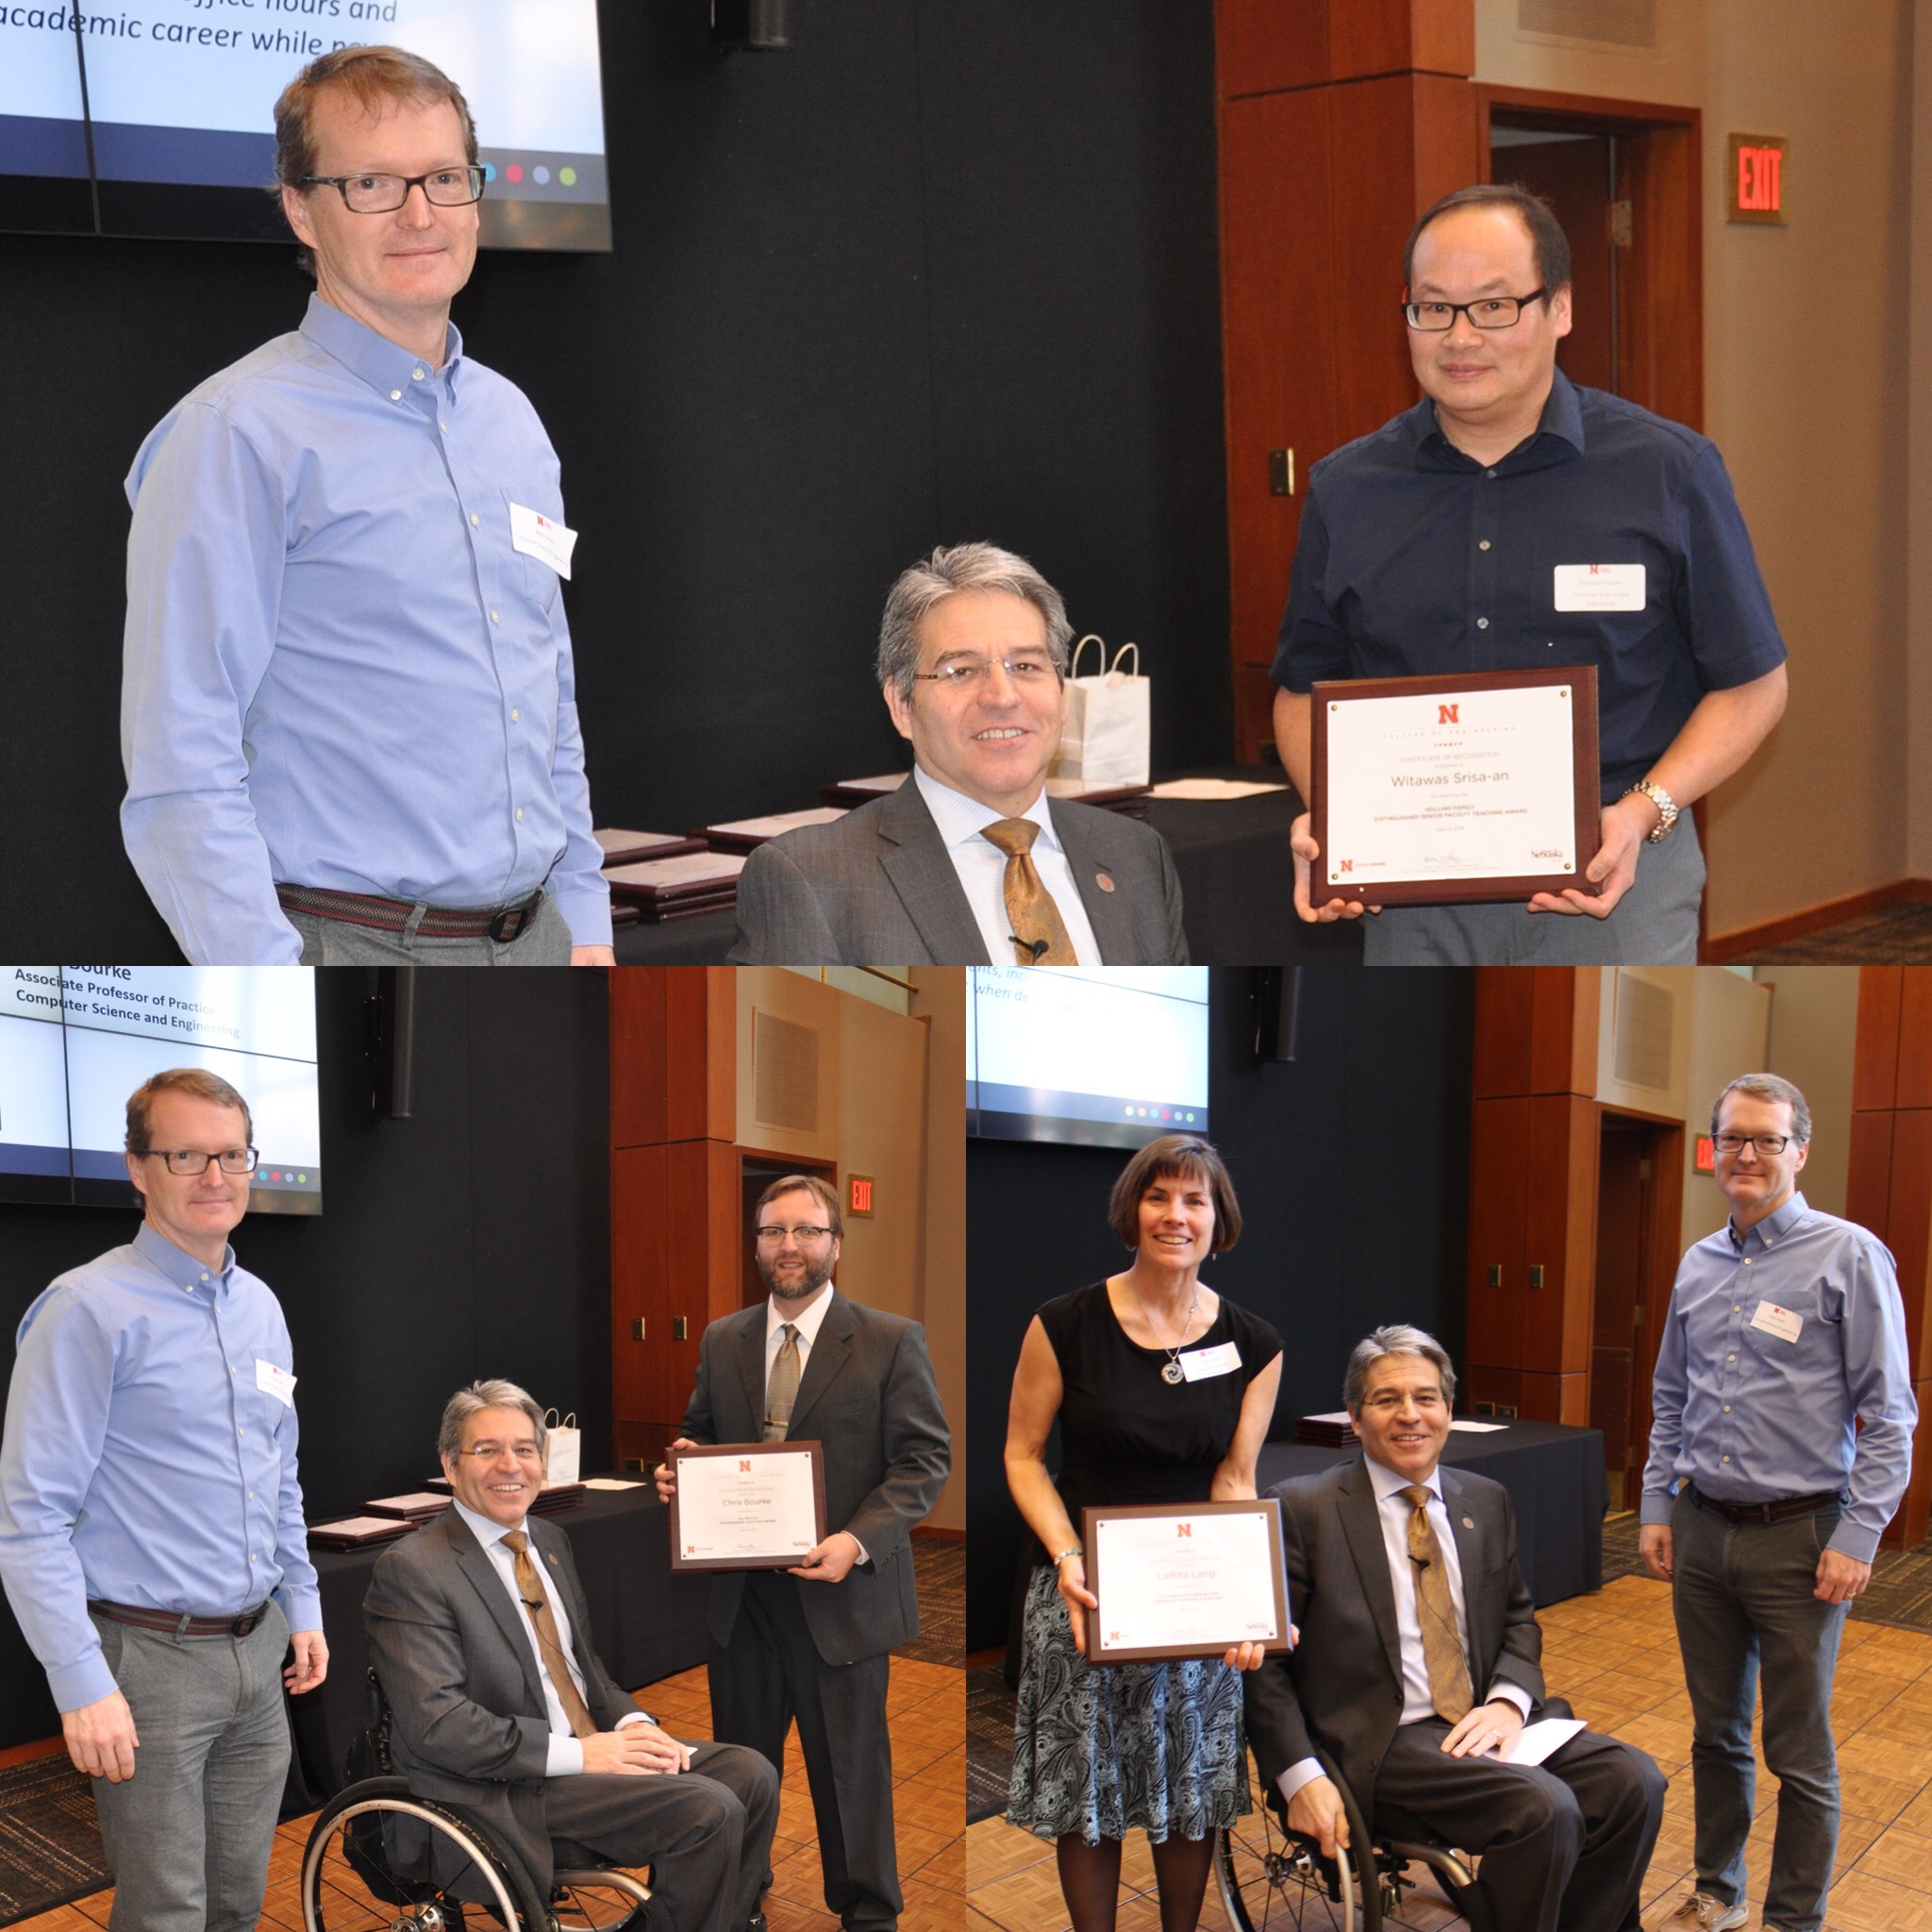 Award winners Witawas Srisa-An, Chris Bourke, and LaRita Lang pose with department chair Matthew Dwyer and interim dean Lance Perez at the College of Engineering Employee Luncheon and Awards Recognition Ceremony last week.